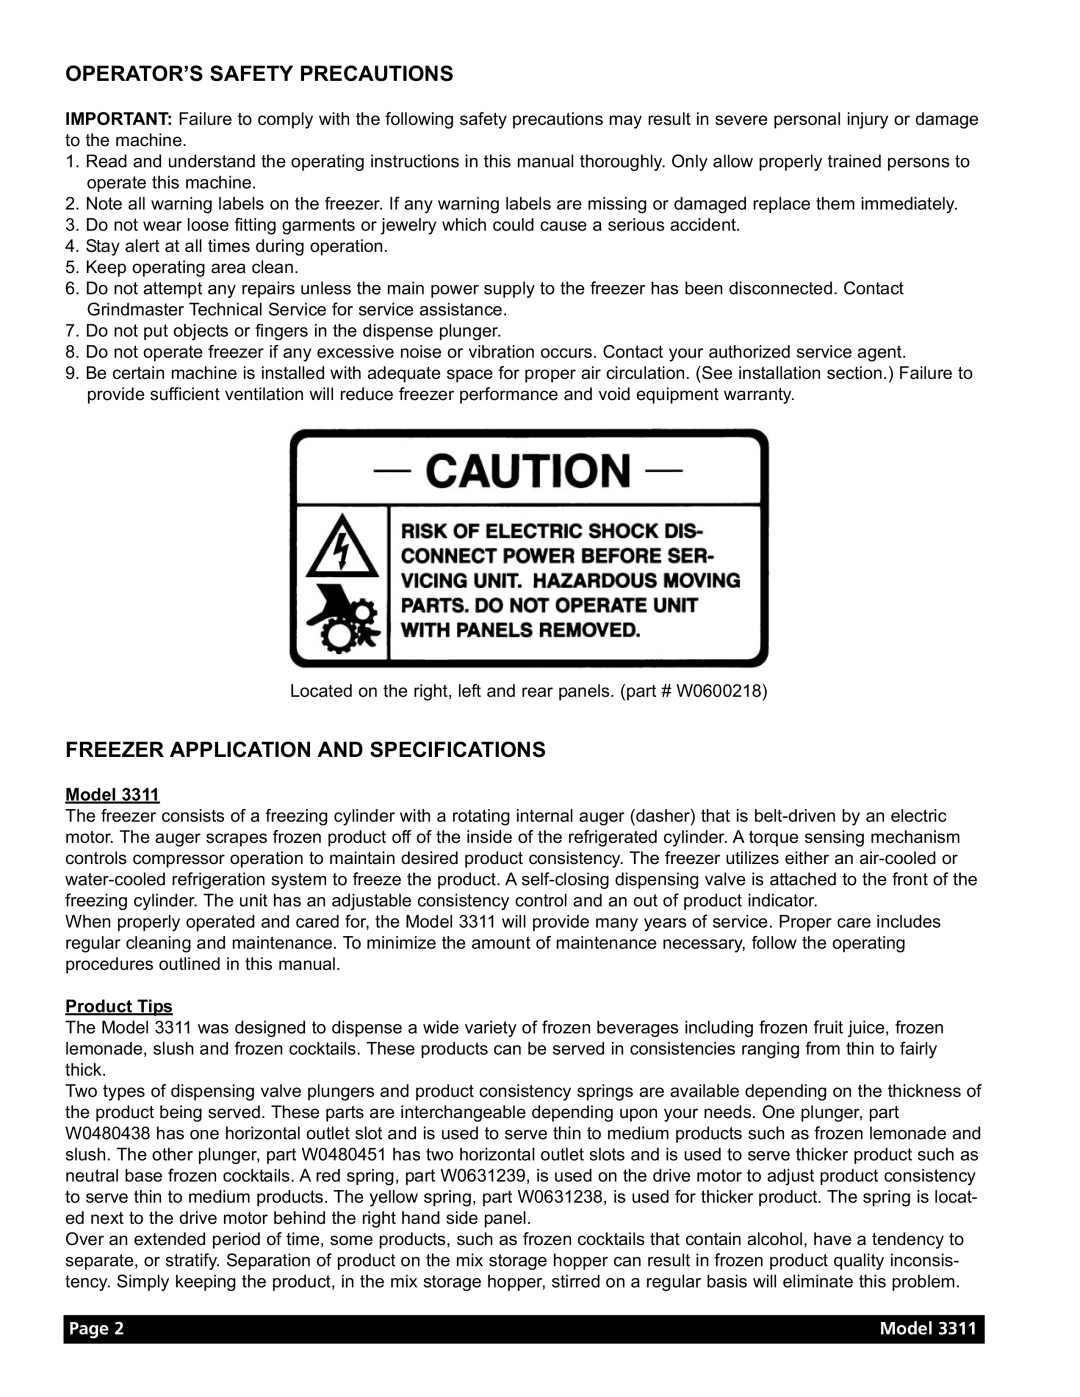 Grindmaster Model 3311 manual Operator’S Safety Precautions, Freezer Application And Specifications, Product Tips, Page 